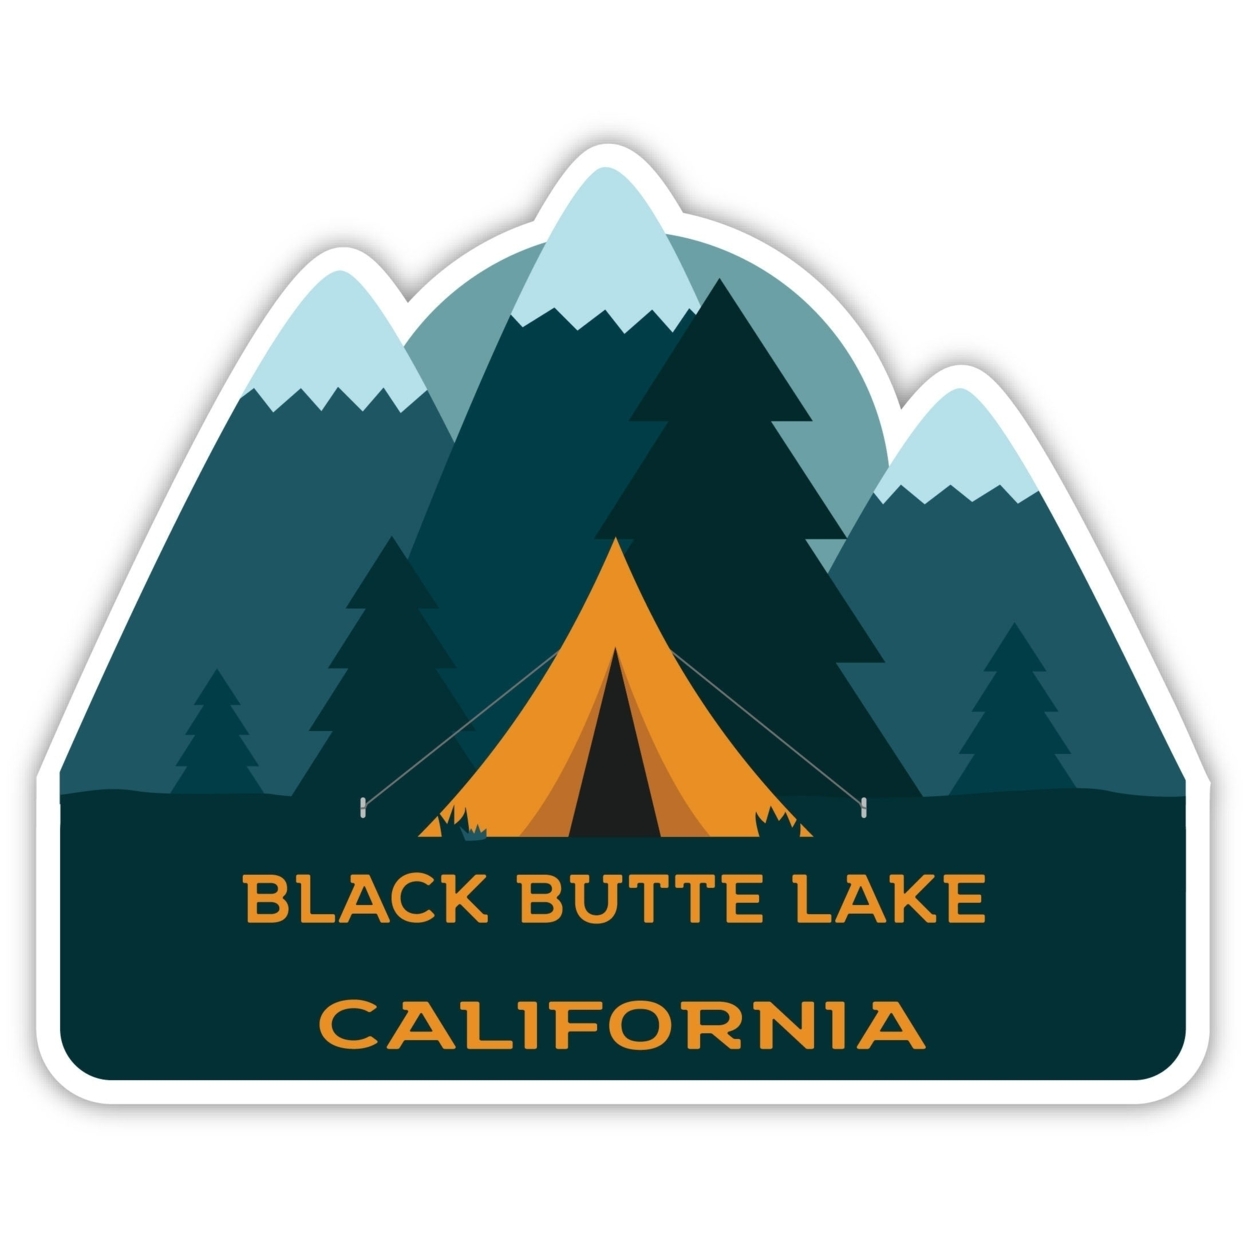 Black Butte Lake California Souvenir Decorative Stickers (Choose Theme And Size) - 4-Pack, 10-Inch, Tent